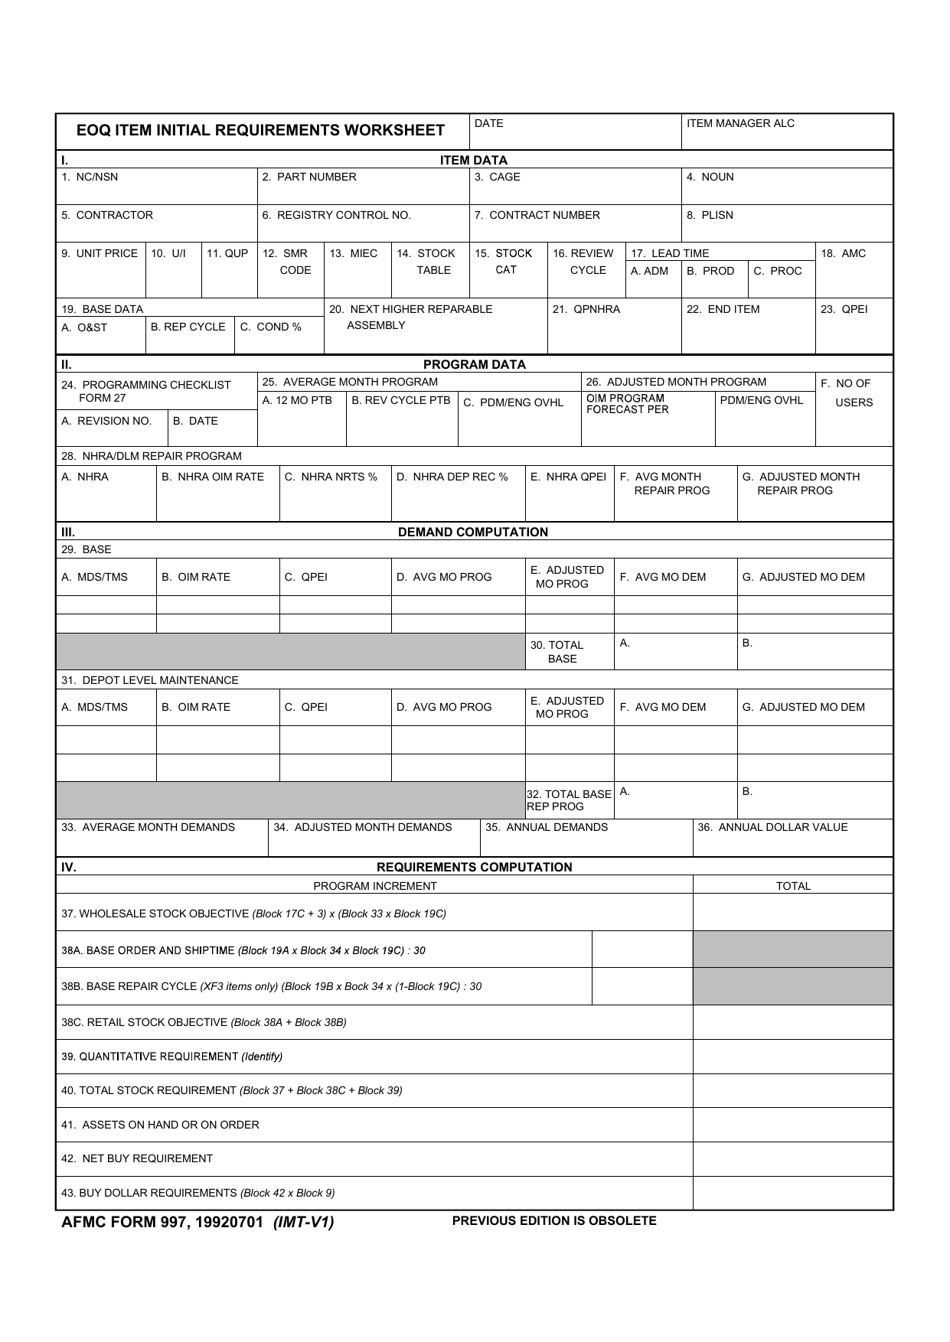 AFMC Form 997 Eoq Item Intial Requirements Worksheet, Page 1